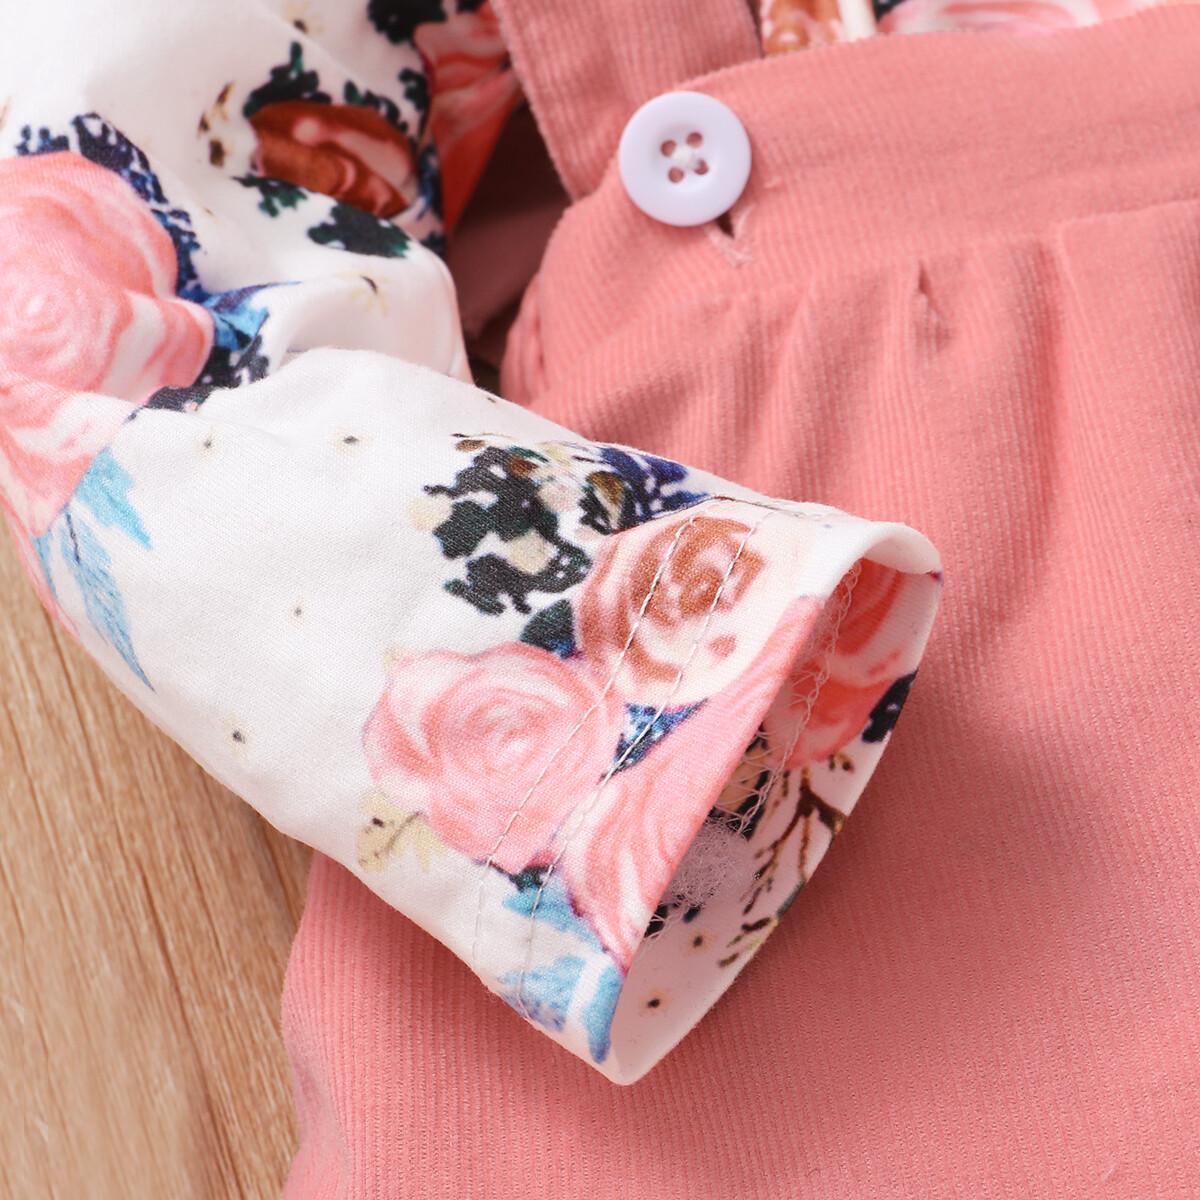 0-12M KID FASHION Newborn Baby Girl Clothes Baby Girl Outfits Long Sleeve Ruffle Floral Romper Top Strap Dress Headband 3PCS Set Pink Catpapa 22010092